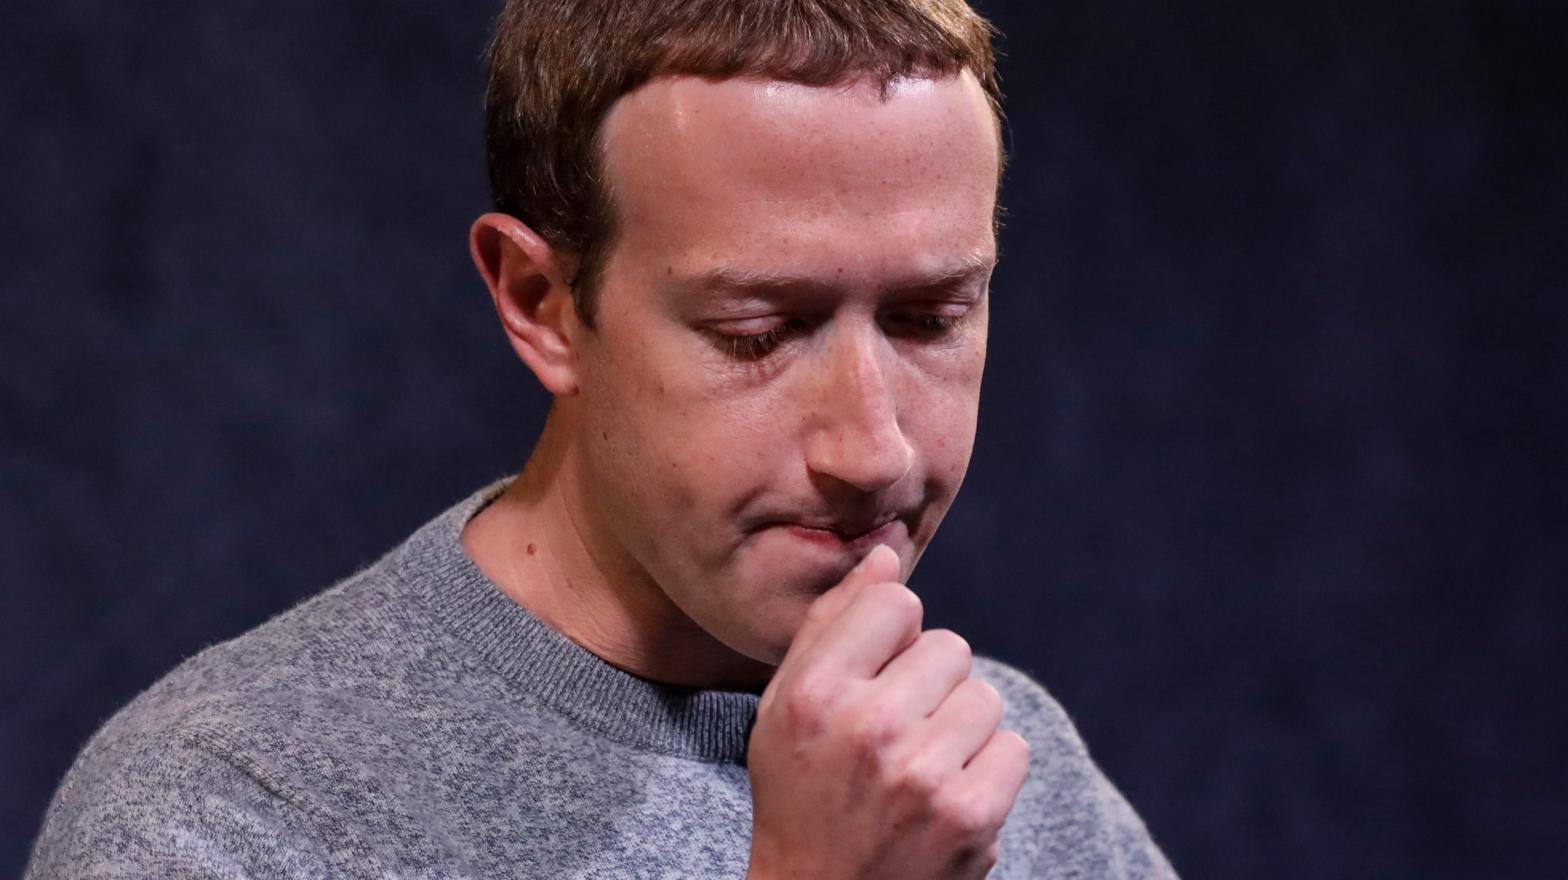 Mark Zuckerberg whose Facebook product is going to ban news if the news code goes through